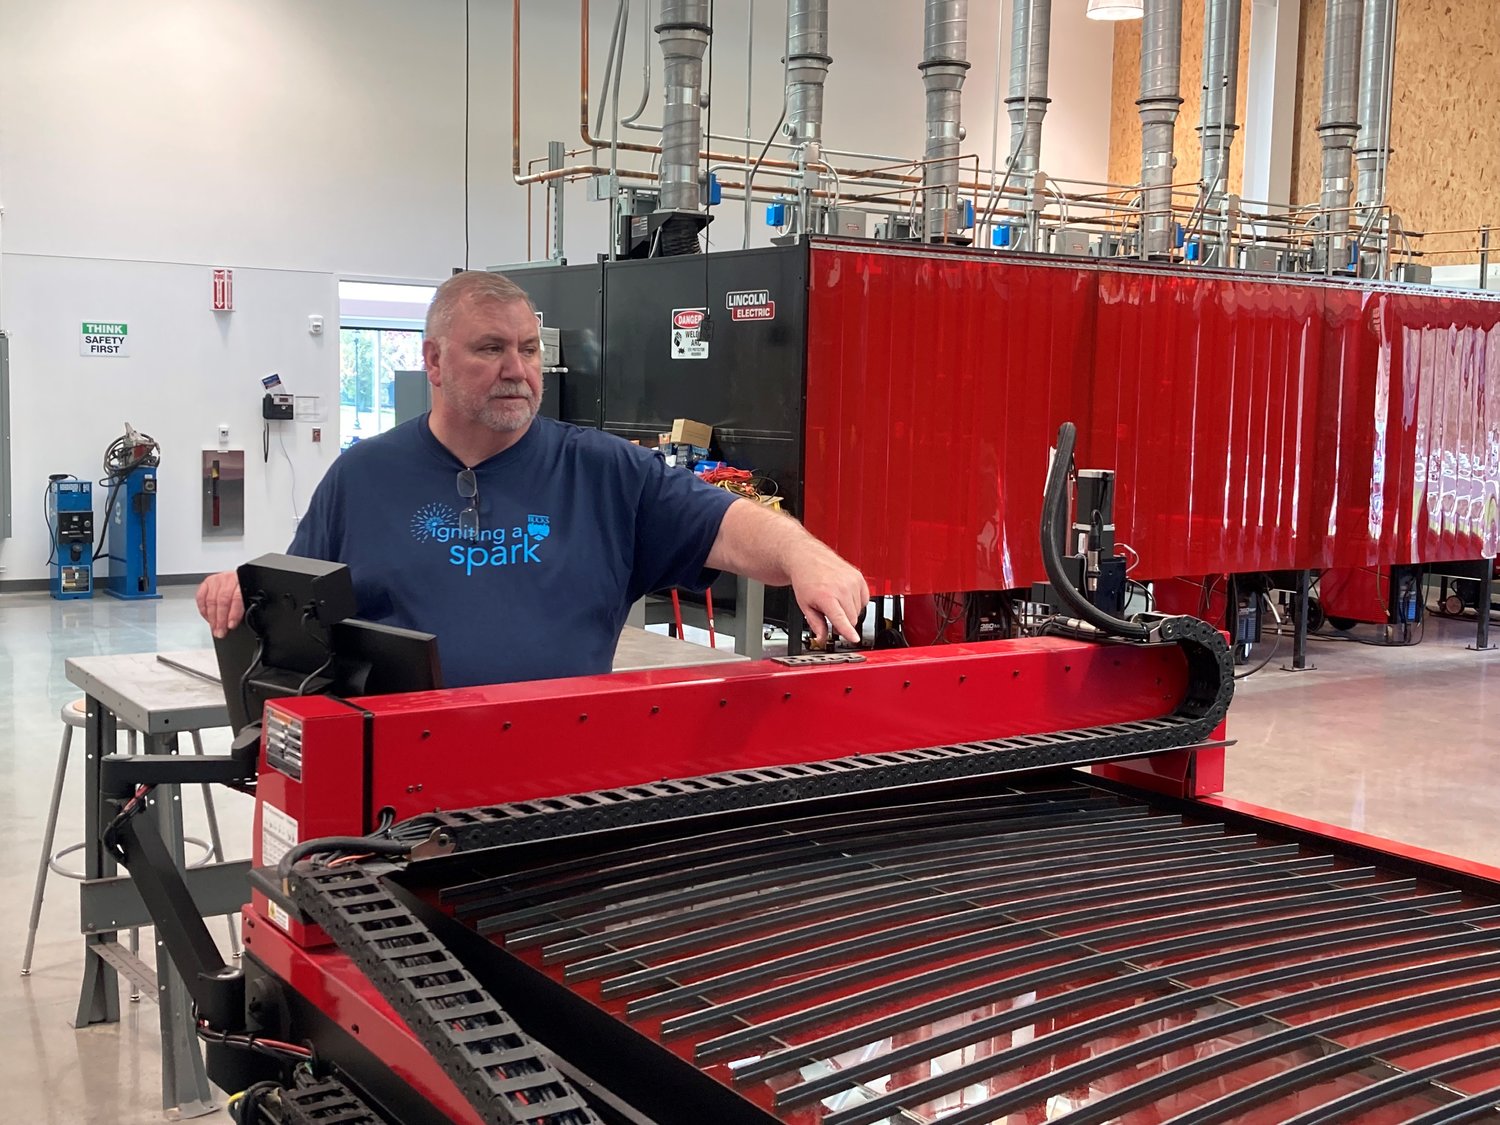 Bucks County Community College instructor Joe Coates shows off a giant plasma table that can produce all kinds of metal shapes at BCCC’s new Center for Advanced Technologies in Bristol Township.